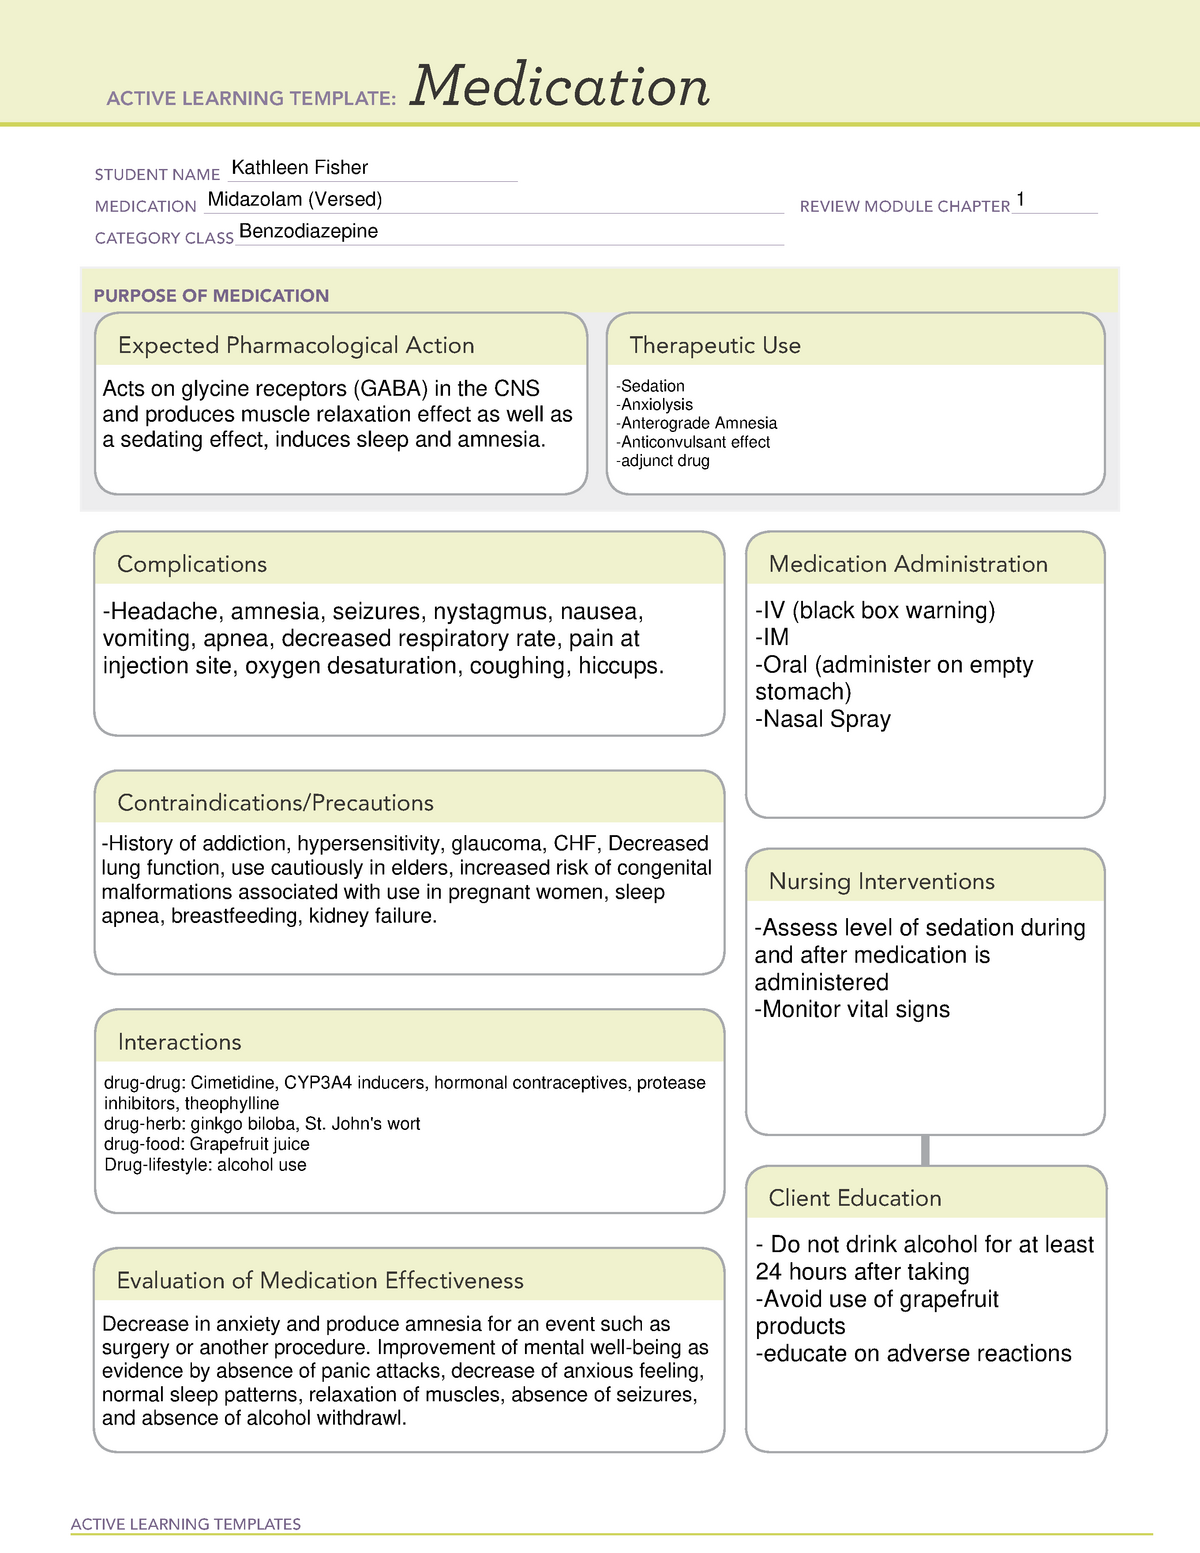 medtemp-midazolam-ati-medication-system-template-active-learning